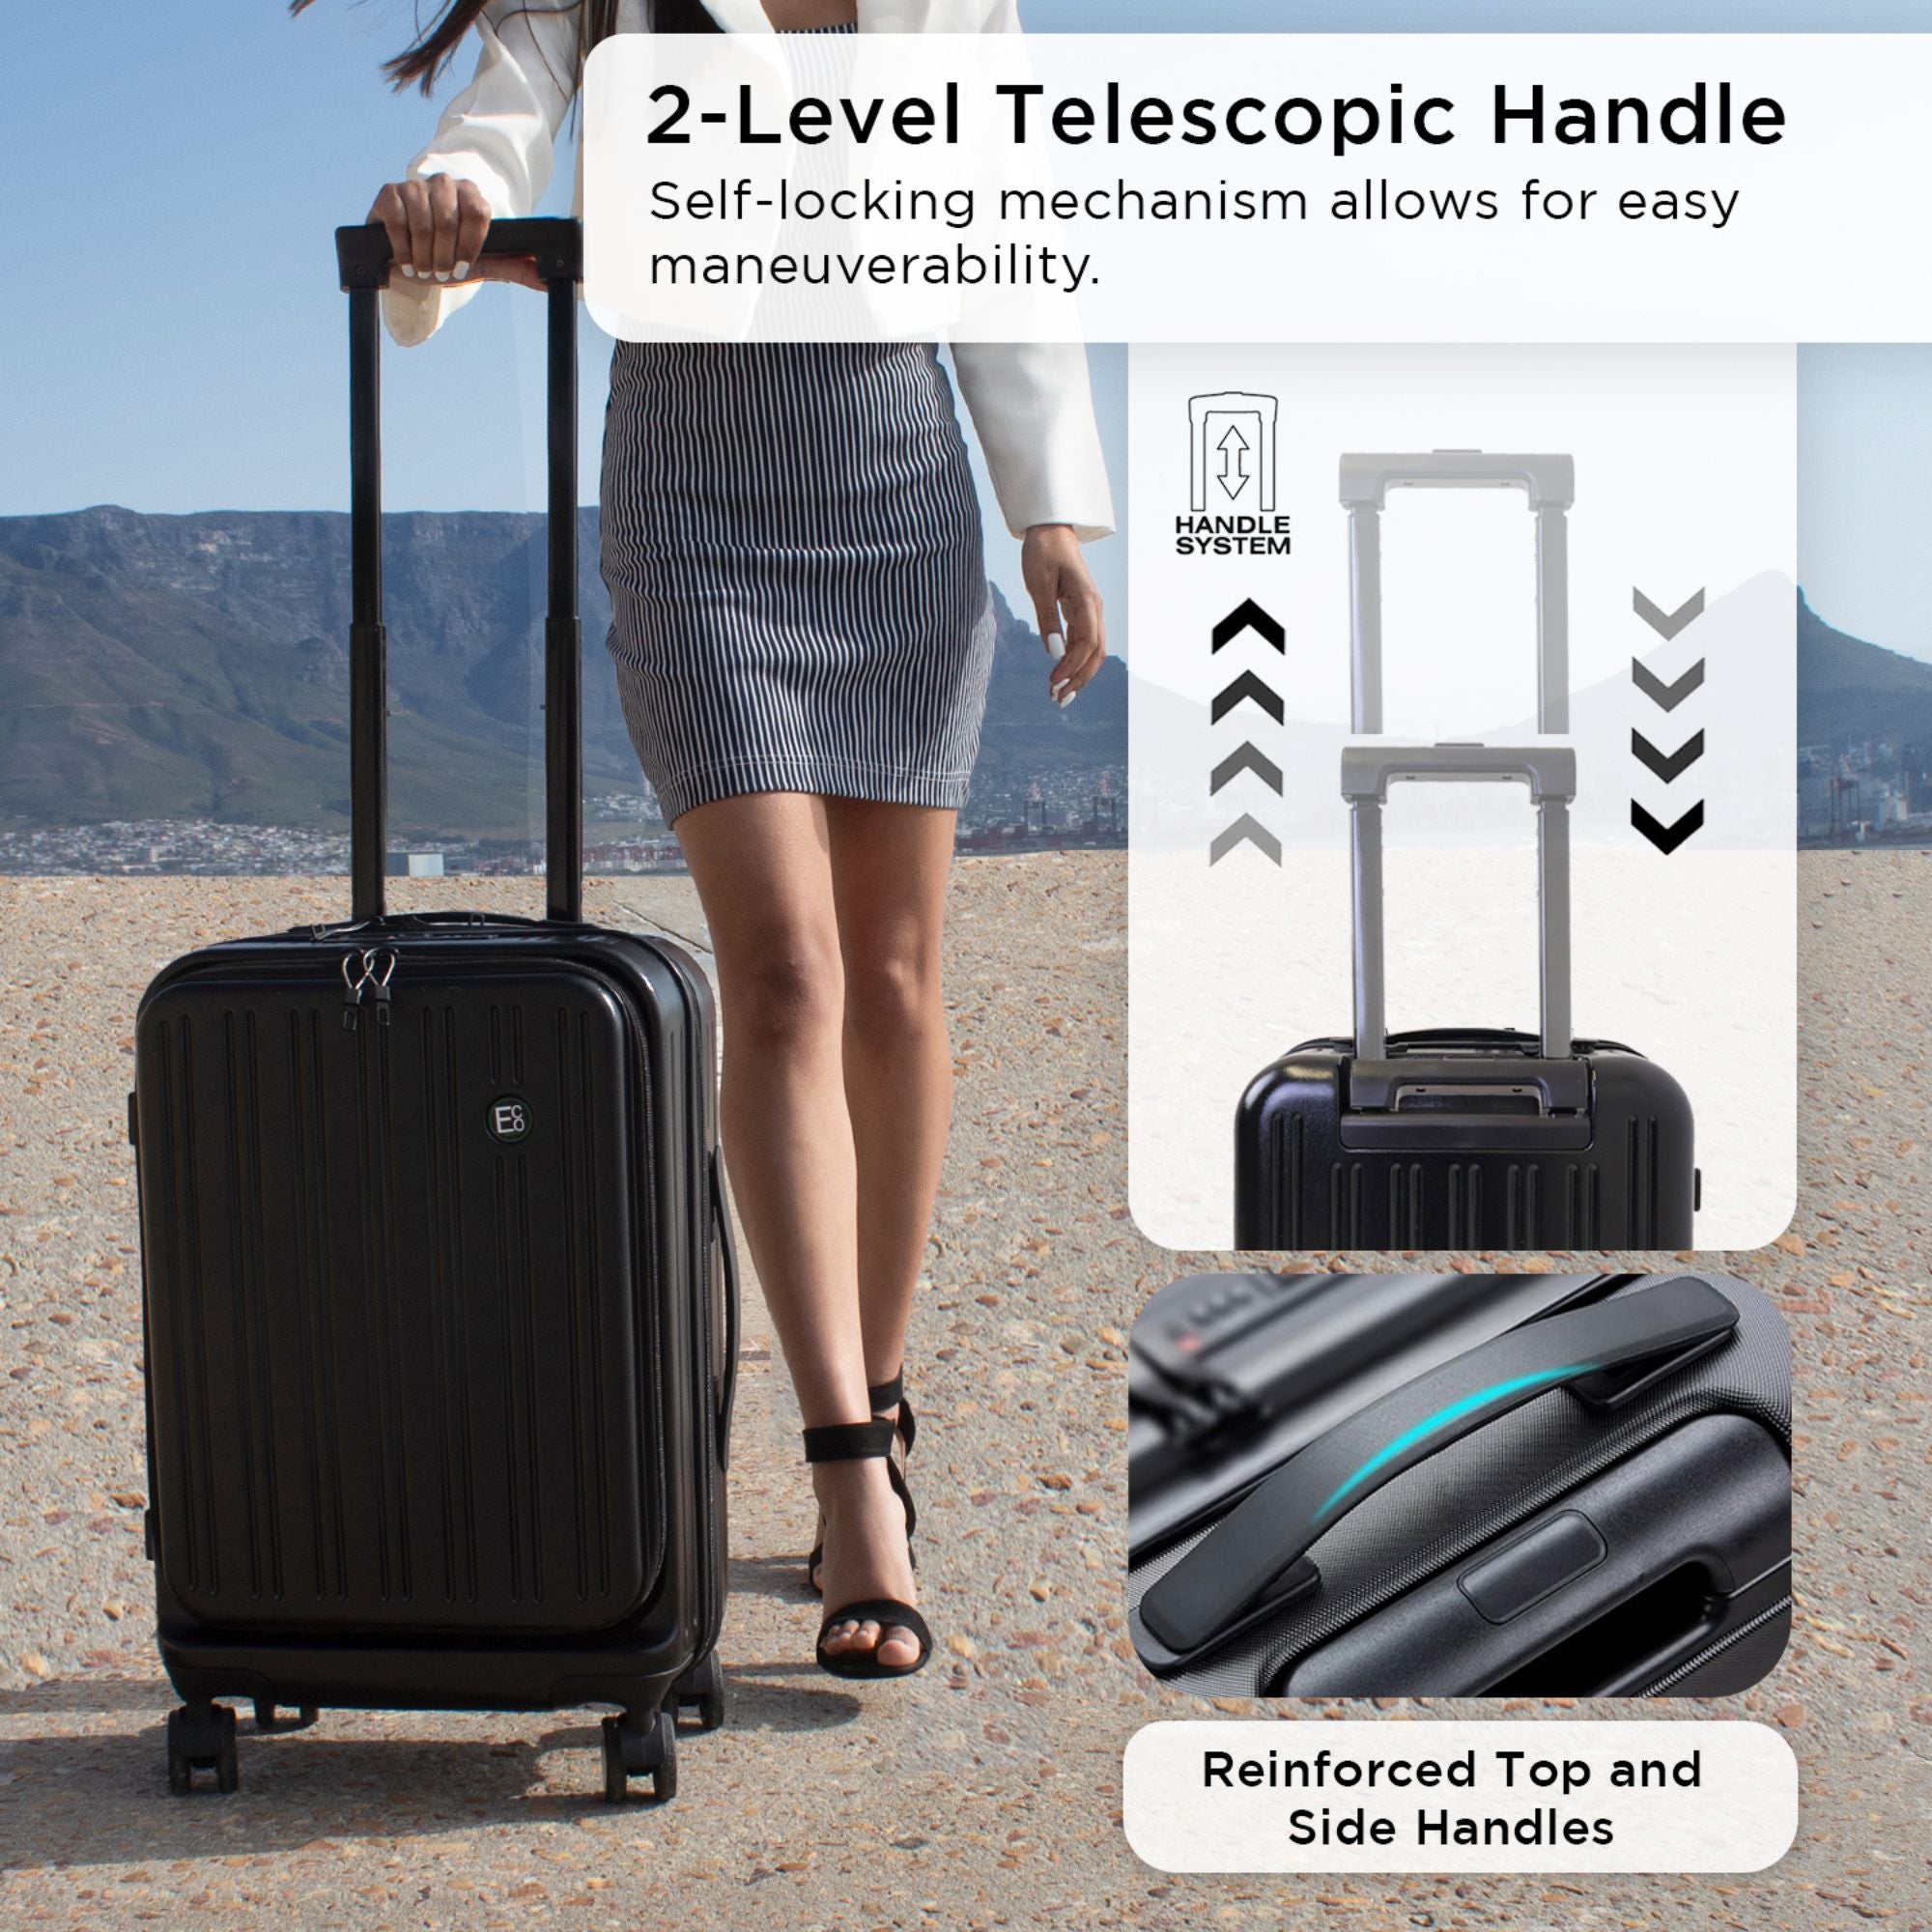 Seattle Business Carry on Luggage Case with Laptop Compartment - 55 cm